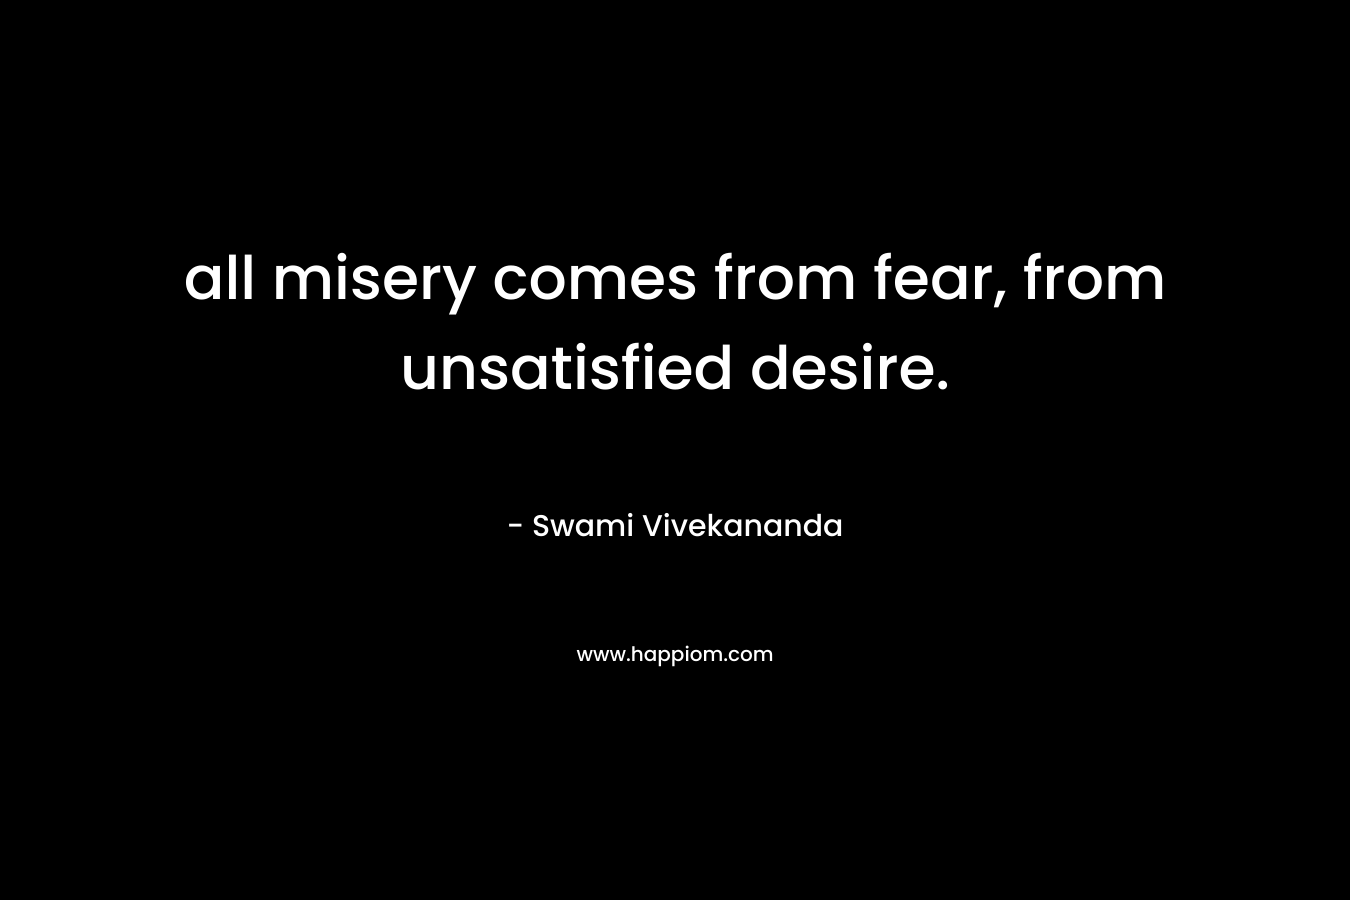 all misery comes from fear, from unsatisfied desire. – Swami Vivekananda